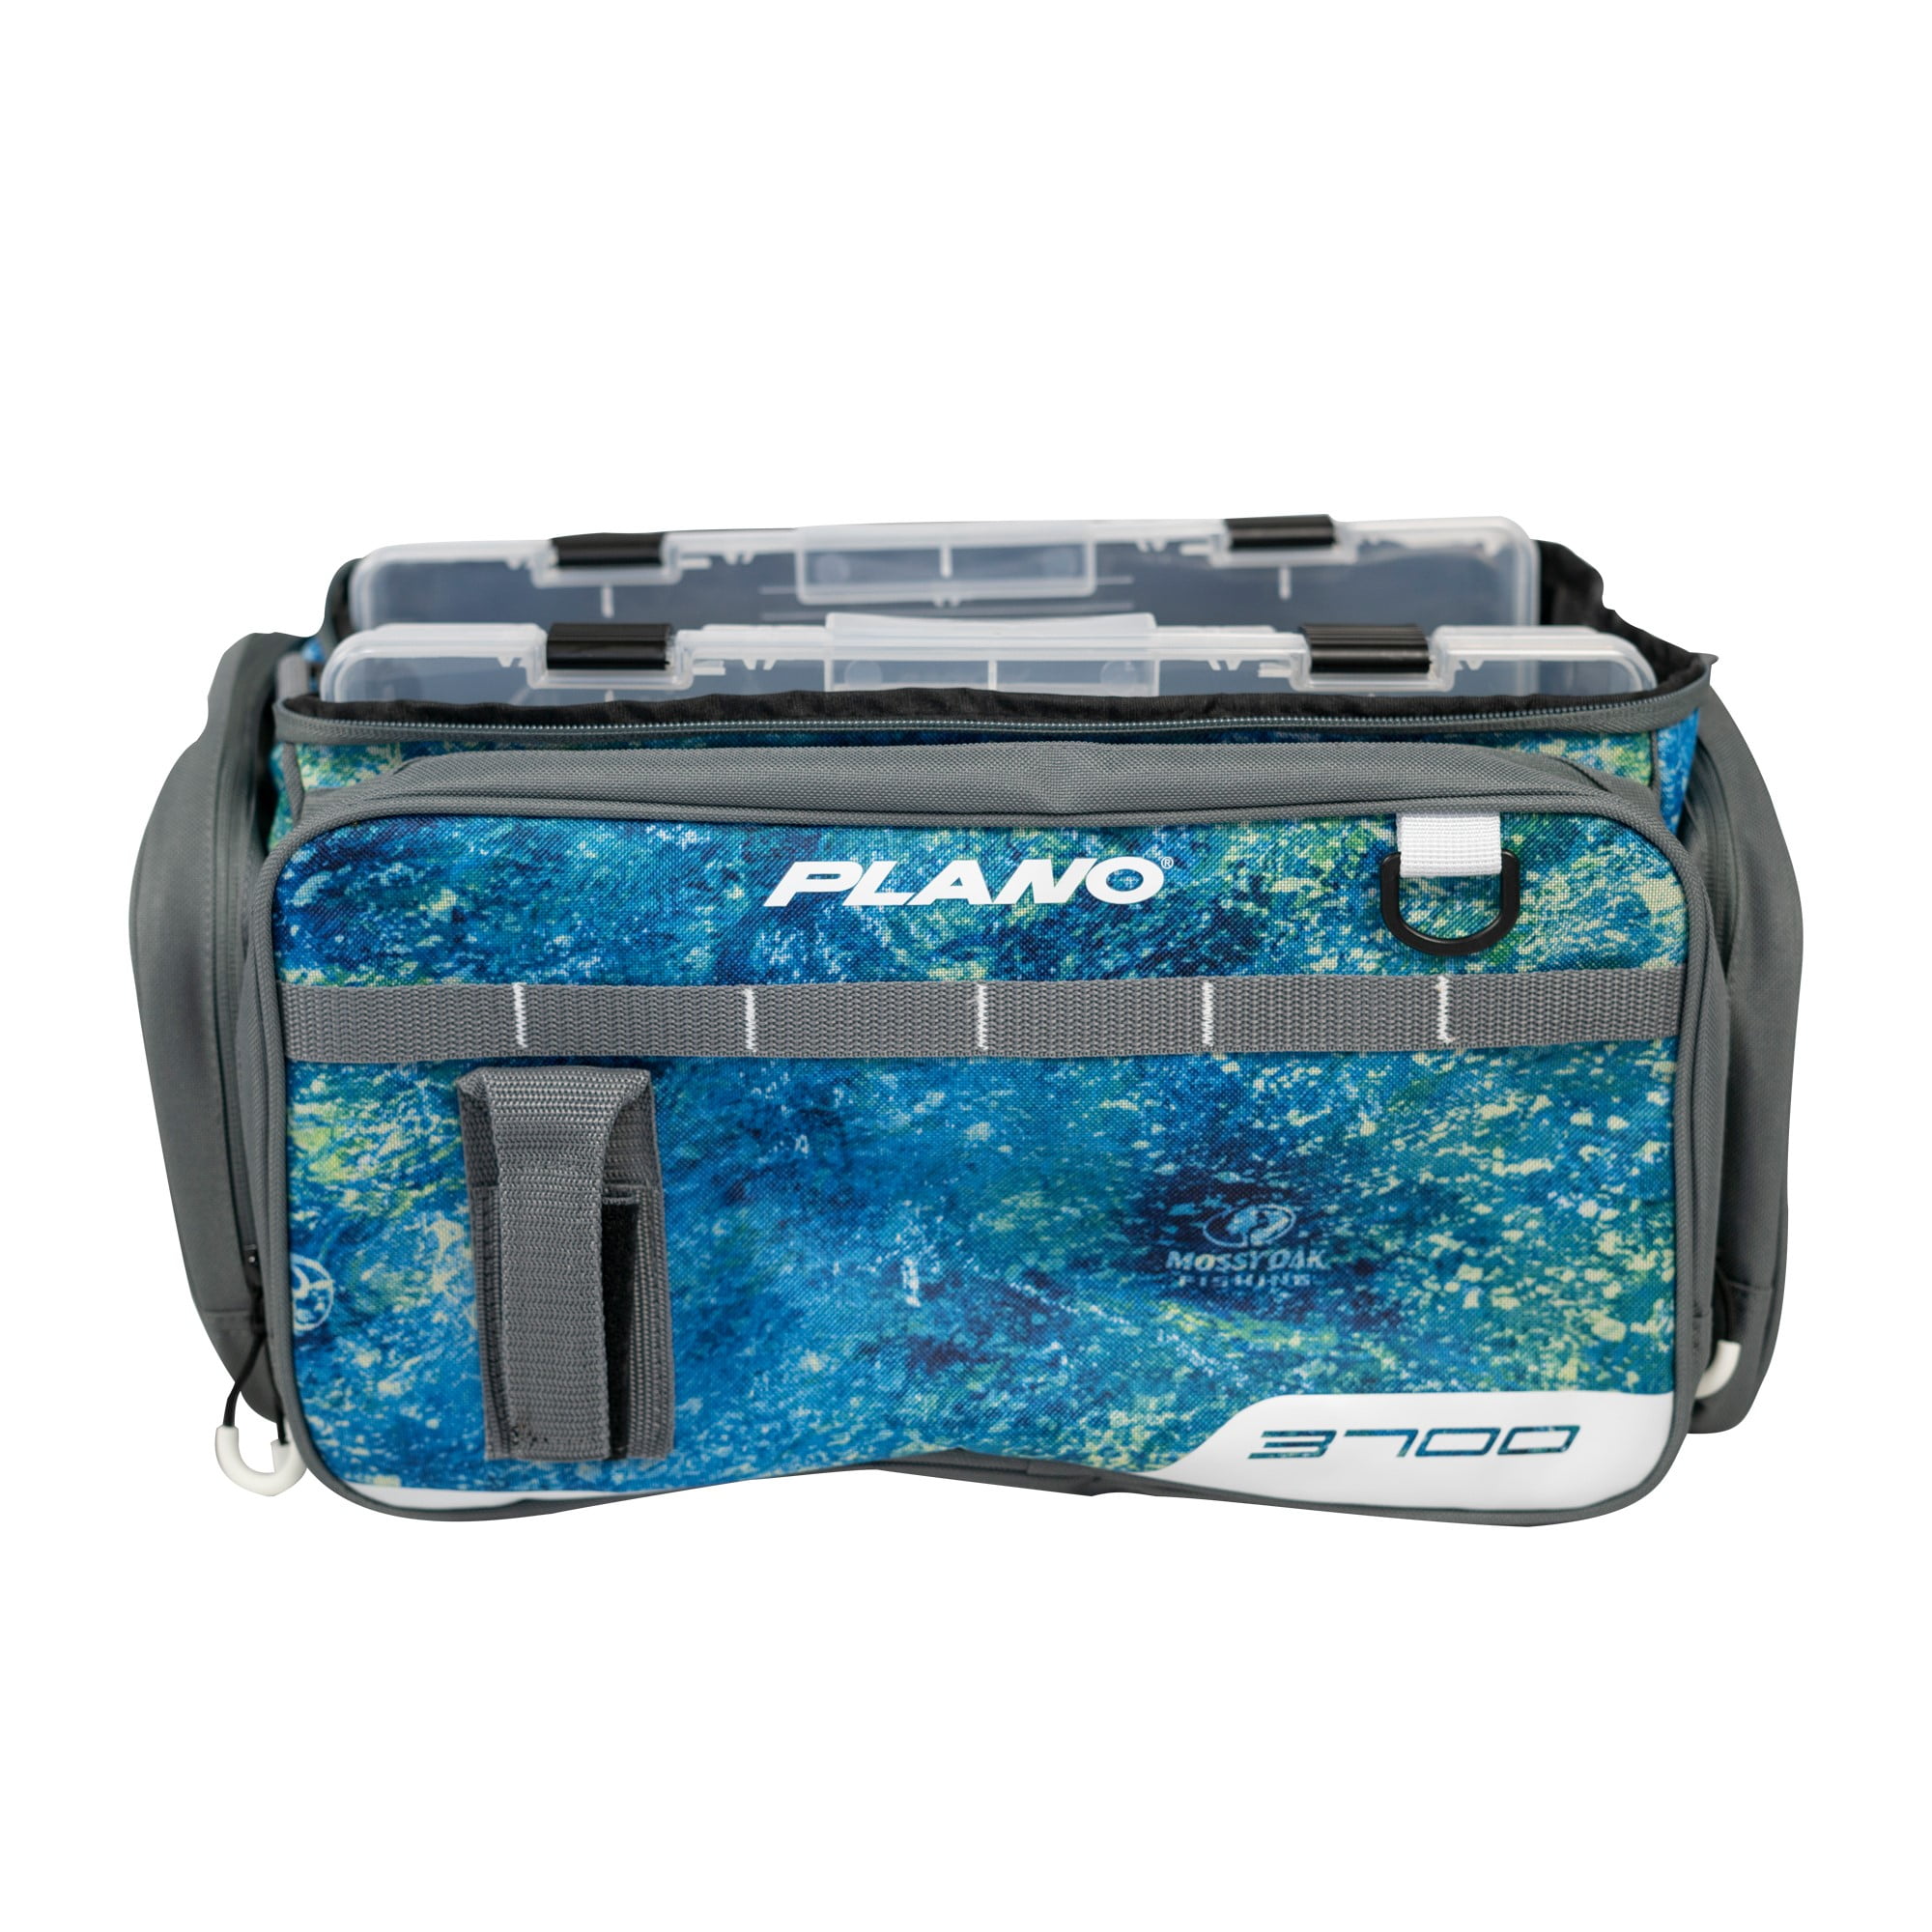 Plano PLAMT6231 Fishing Equipment Tackle Bags & Boxes, Bright Blue/Black,  One Size